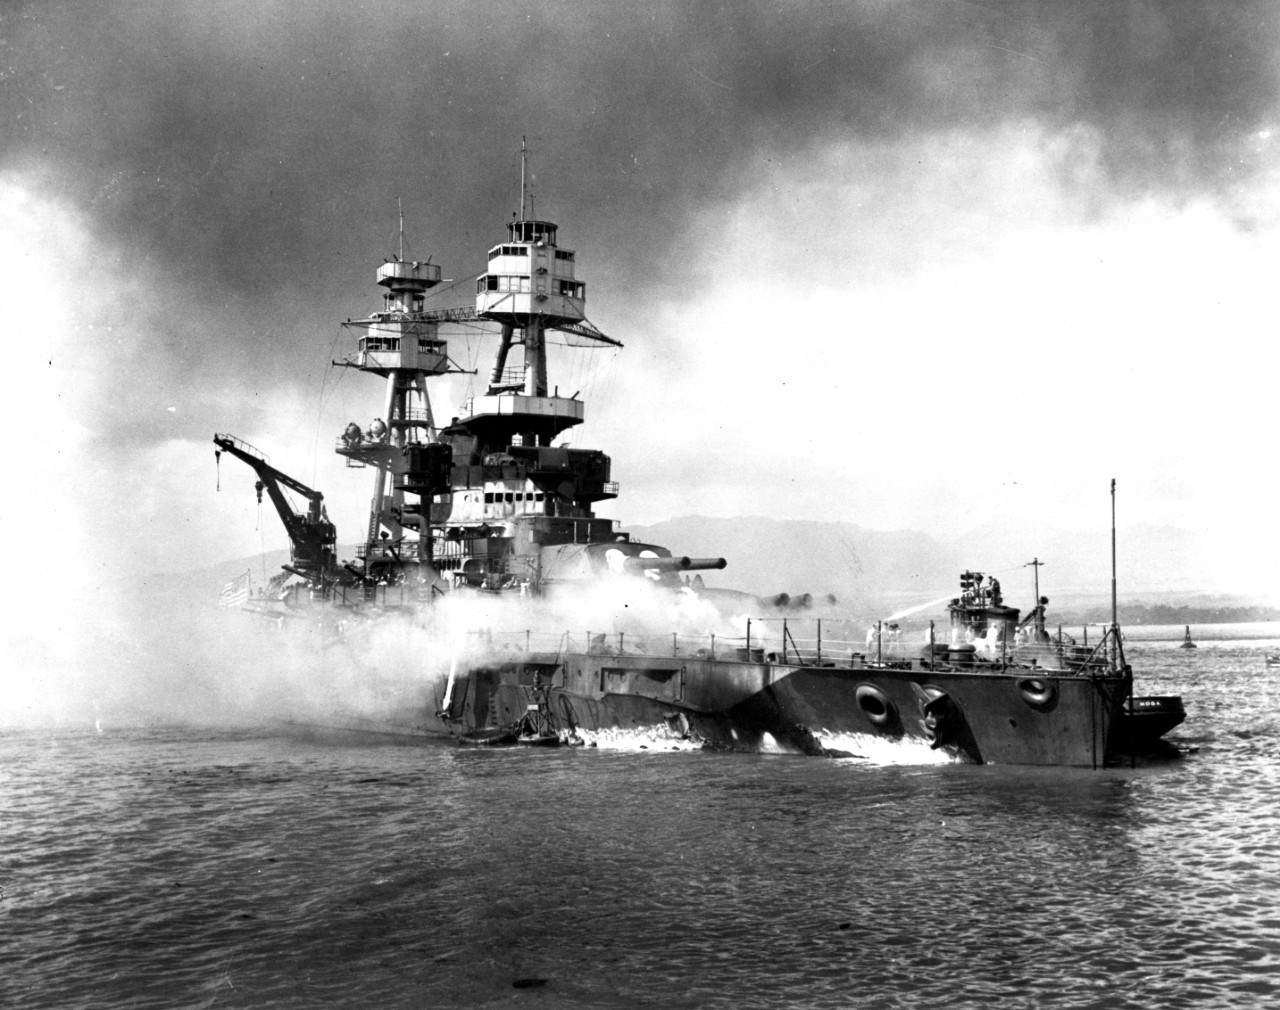 80-G-19940:  Pearl Harbor Attack, December 7, 1941.   USS Nevada (BB-36) burning during the Japanese aerial attack.   Official U.S. Navy Photograph, now in the collections of the National Archives.  